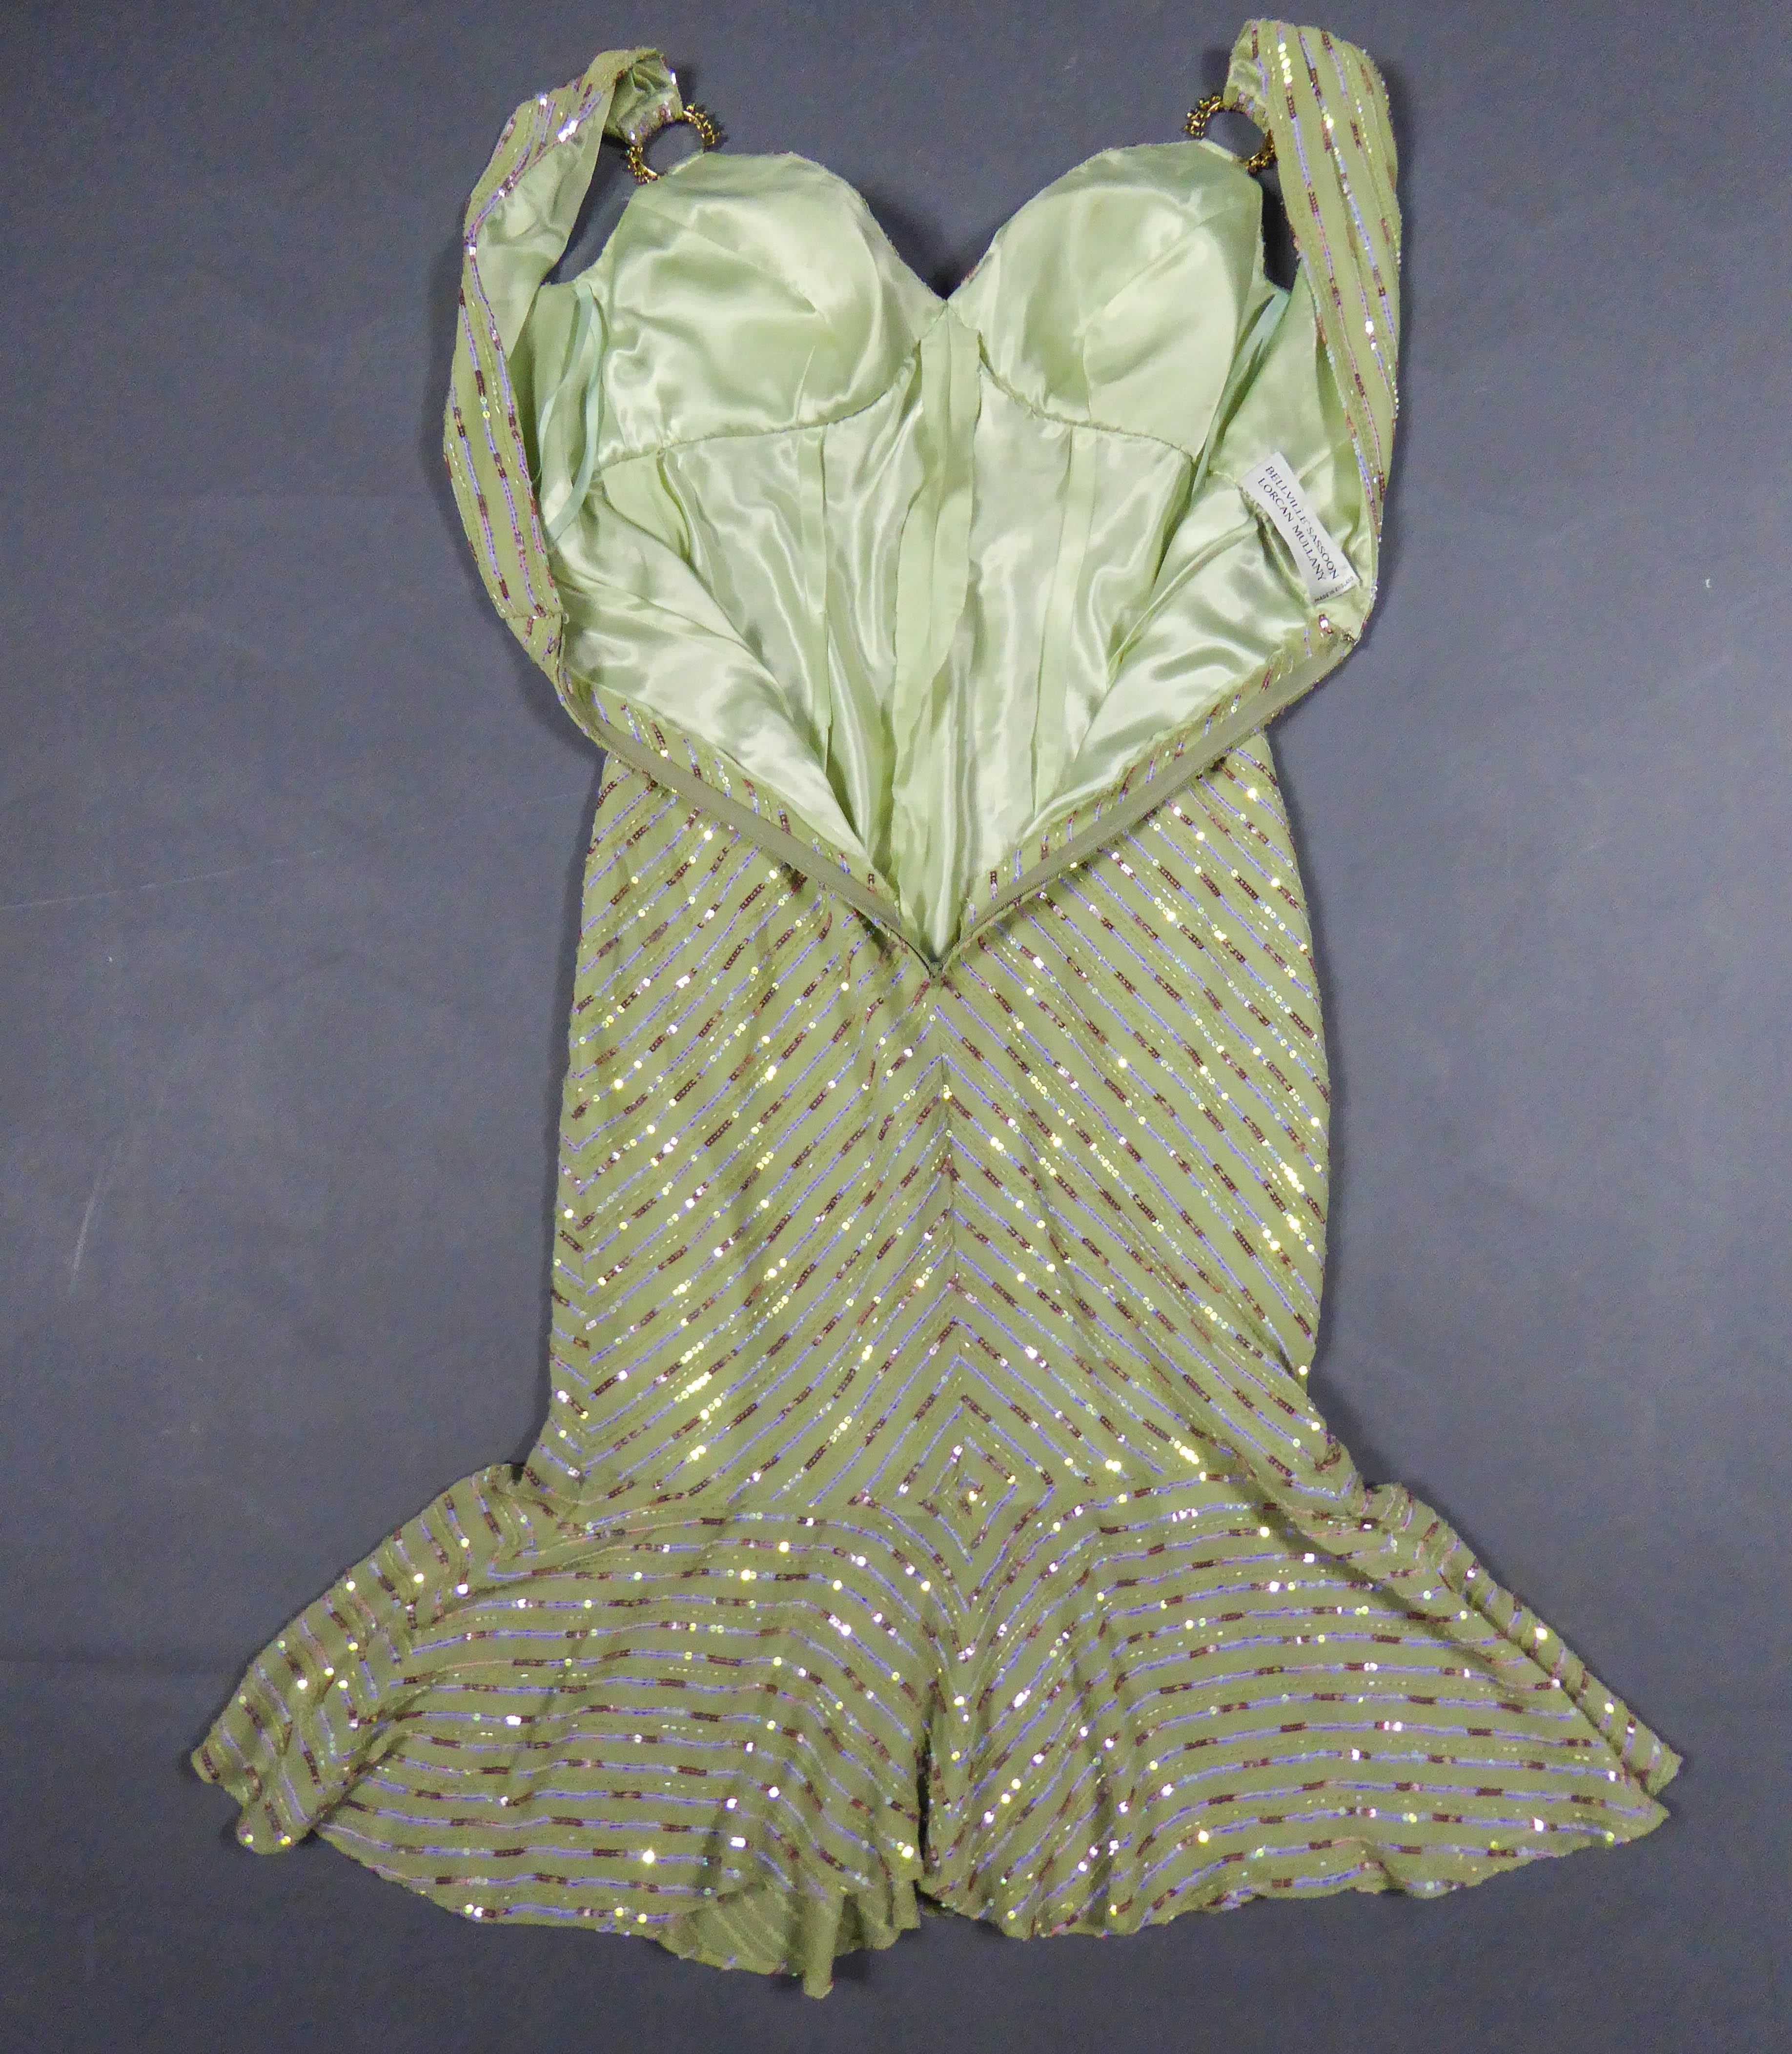 Circa 1990
England

Cocktail or evening dress in pale green celadon silk crepe embroidered with iridescent silver, pink and blue sequins. Dress with large low-cut neckline, sleeveless and high waist. Rhinestone jewelry rings at the level of the